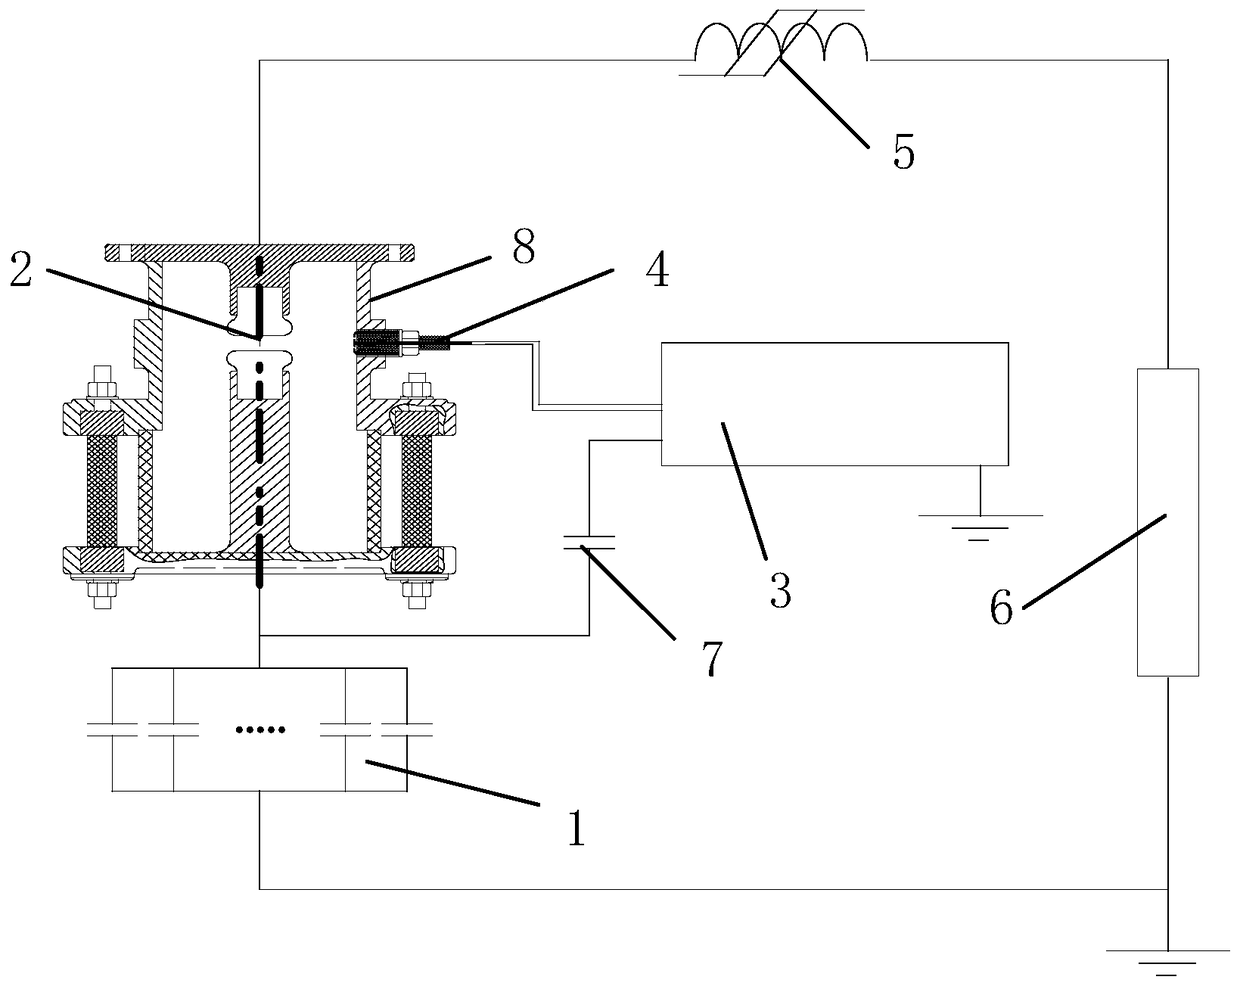 A circuit and method for prolonging the service life of a two-electrode gas switch